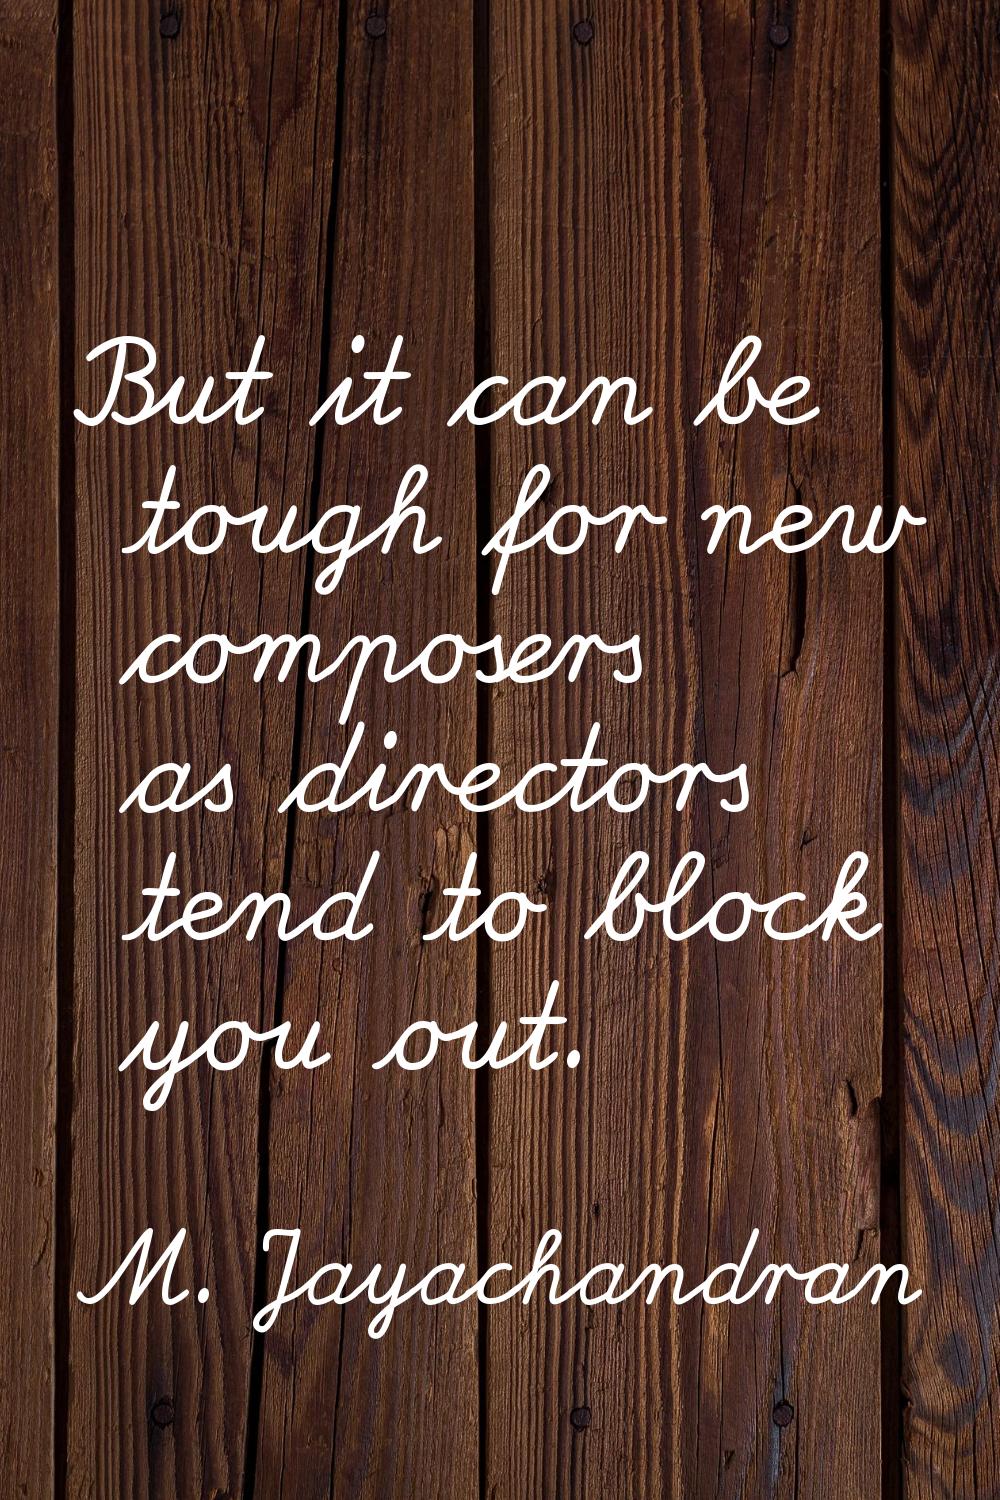 But it can be tough for new composers as directors tend to block you out.